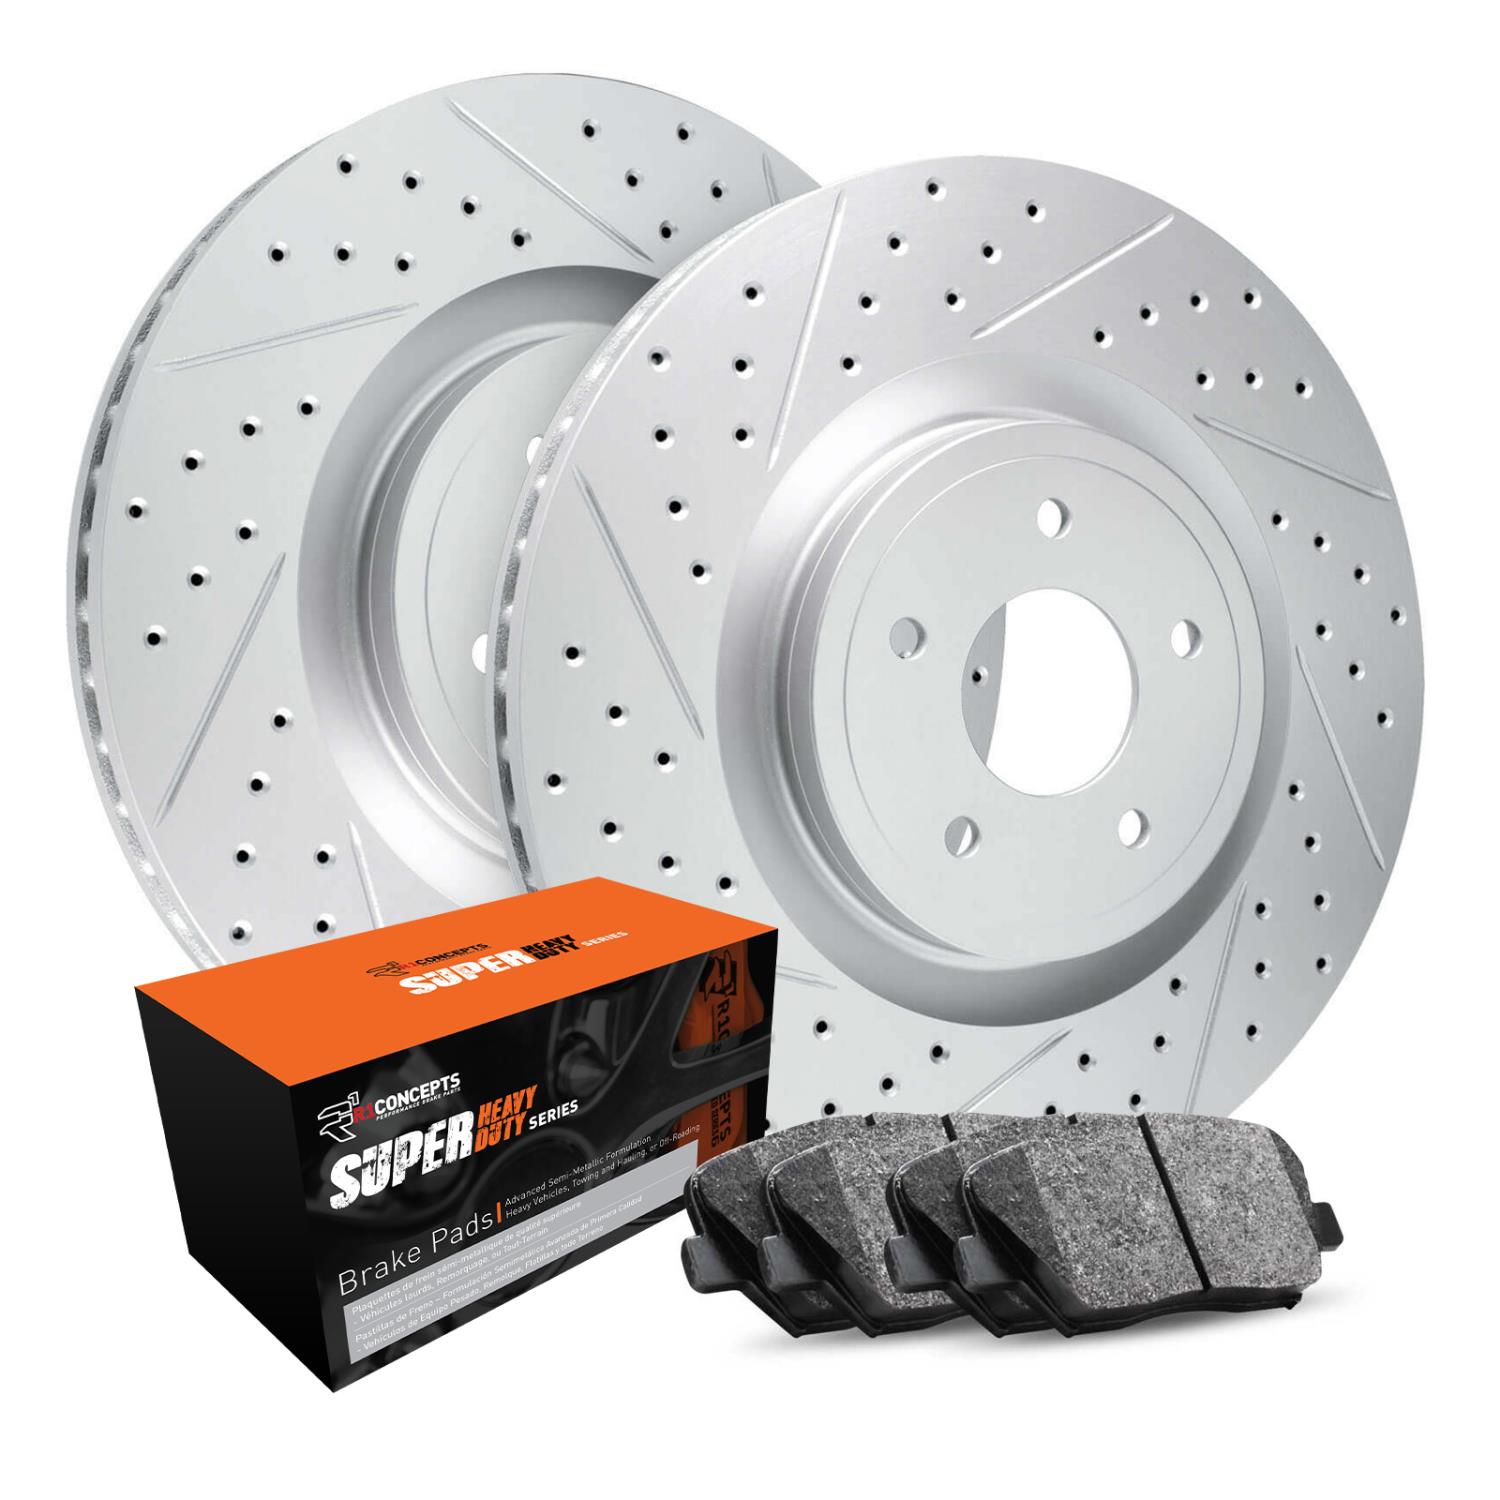 GEO-Carbon Drilled & Slotted Brake Rotor Set w/Super-Duty Pads, Fits Select Fits Multiple Makes/Models, Position: Rear